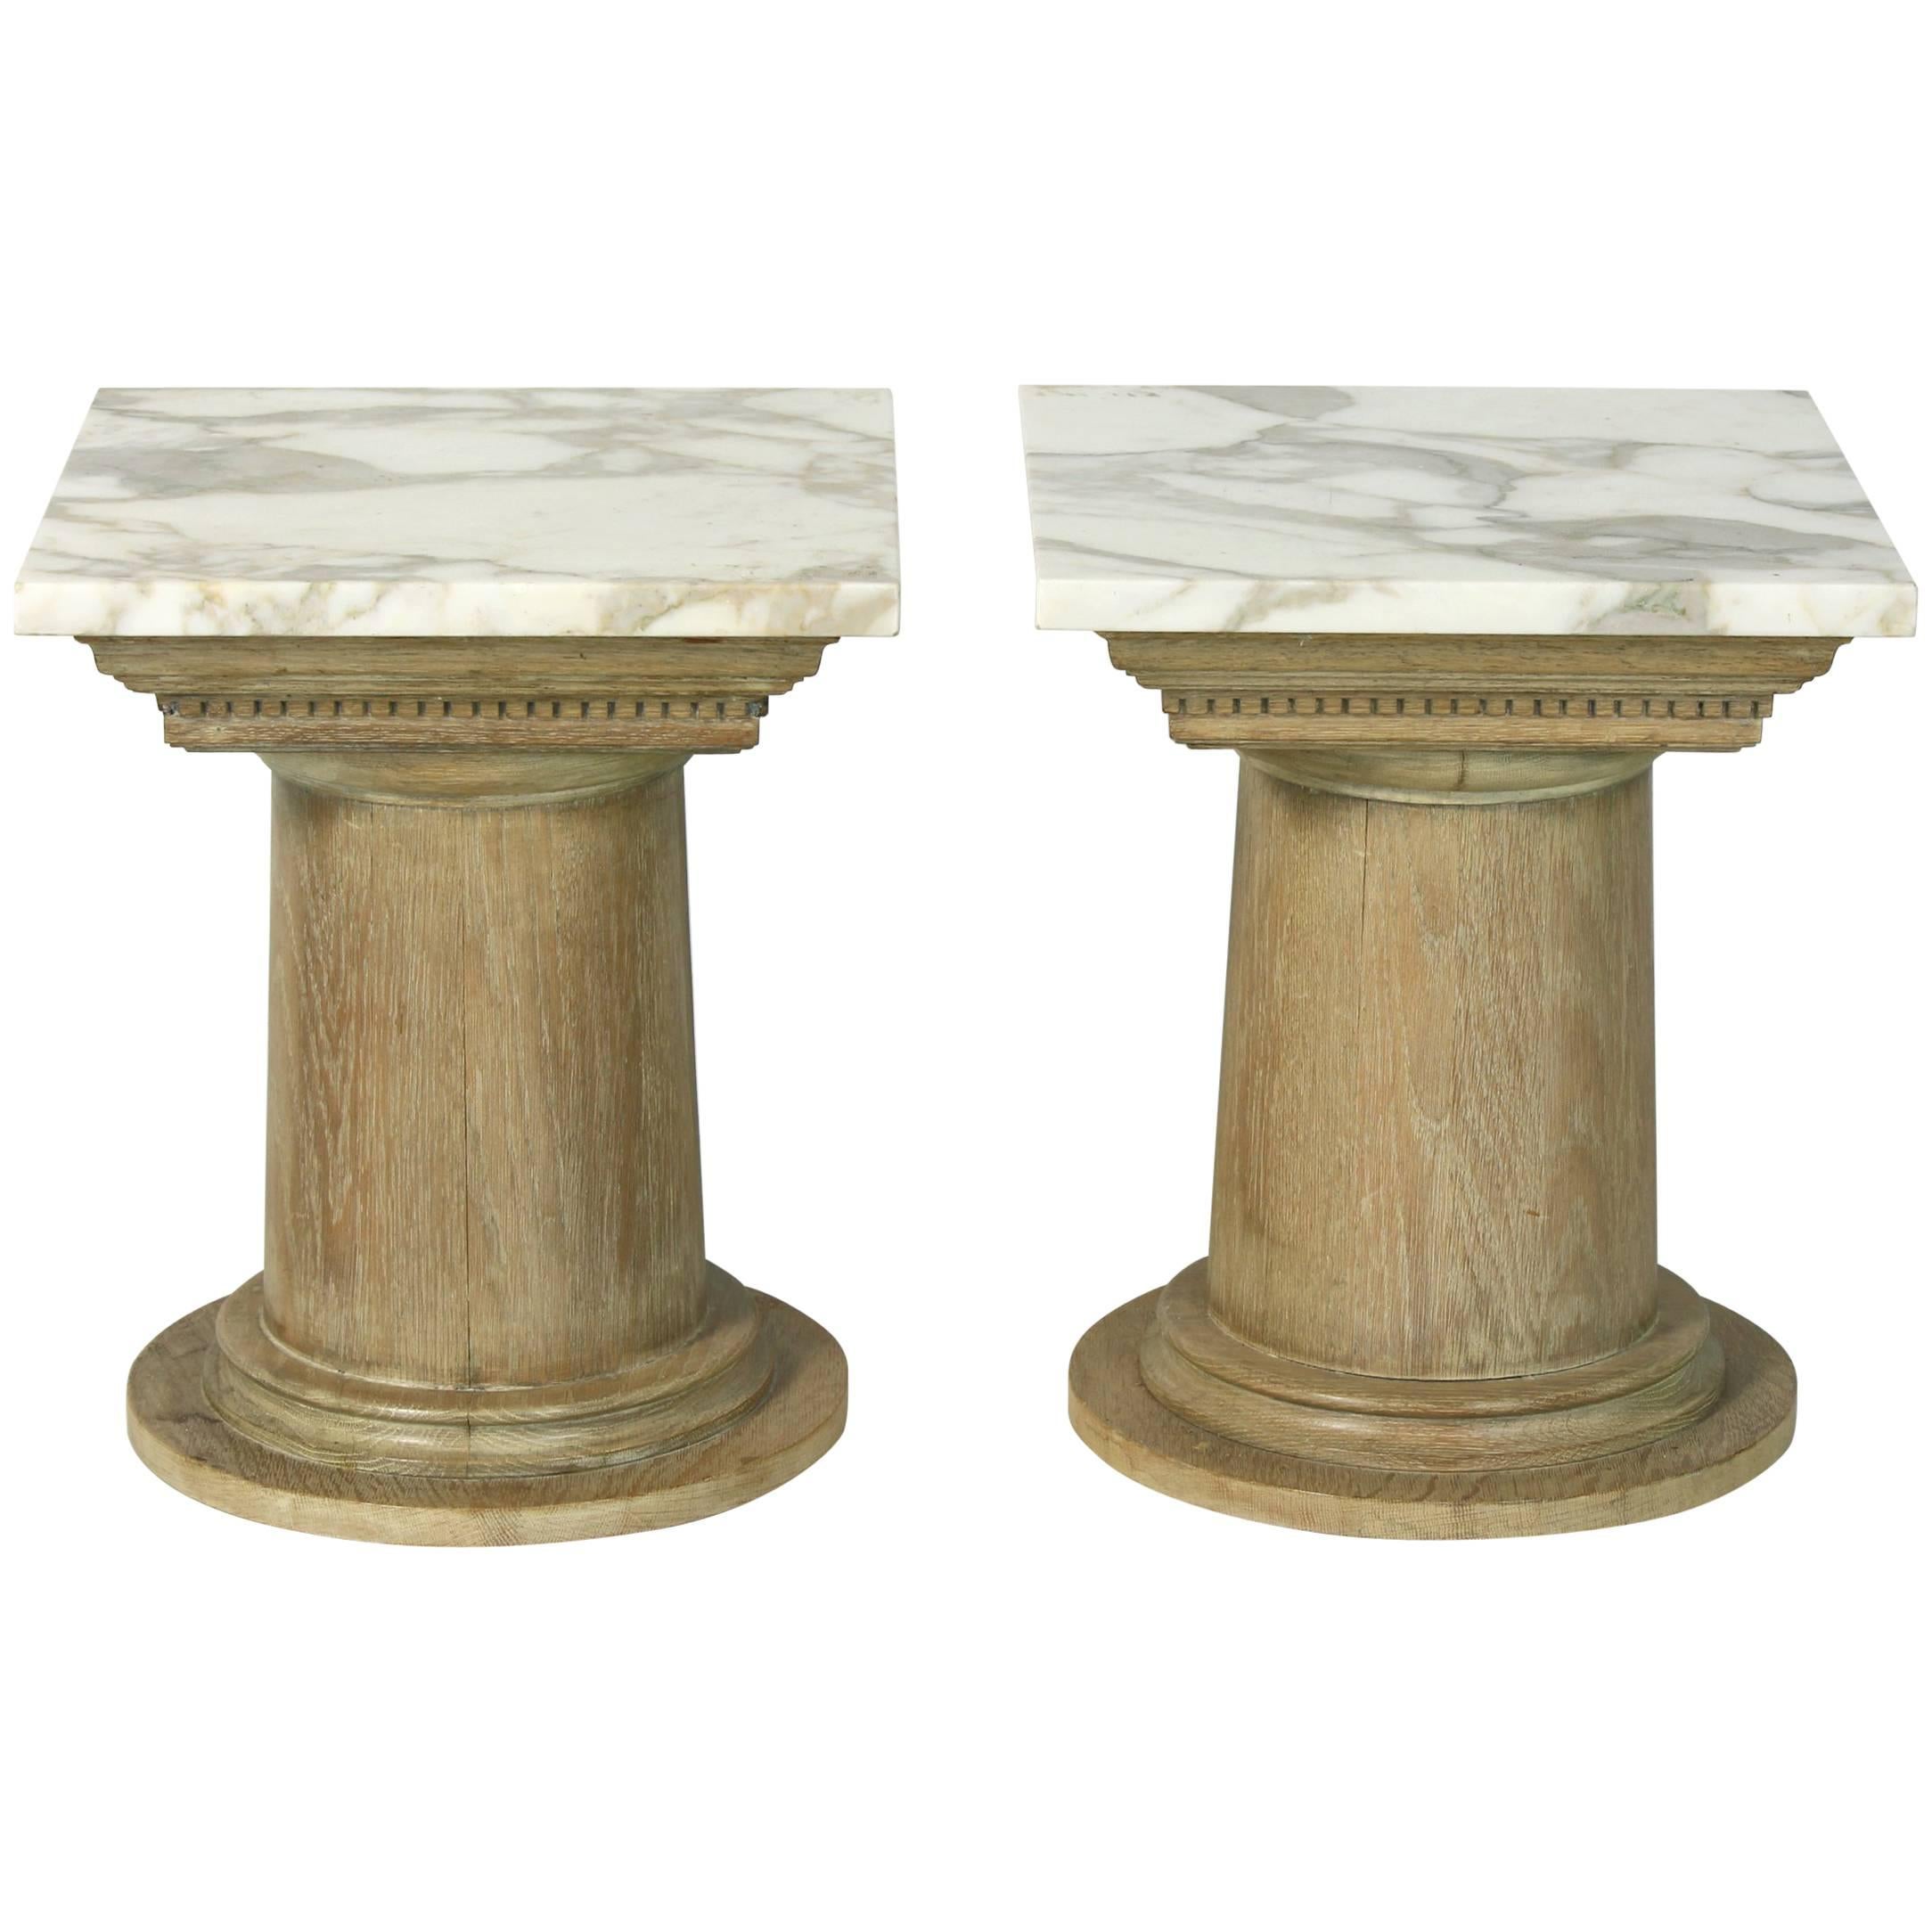 Pair of French Marble-Top Side Tables